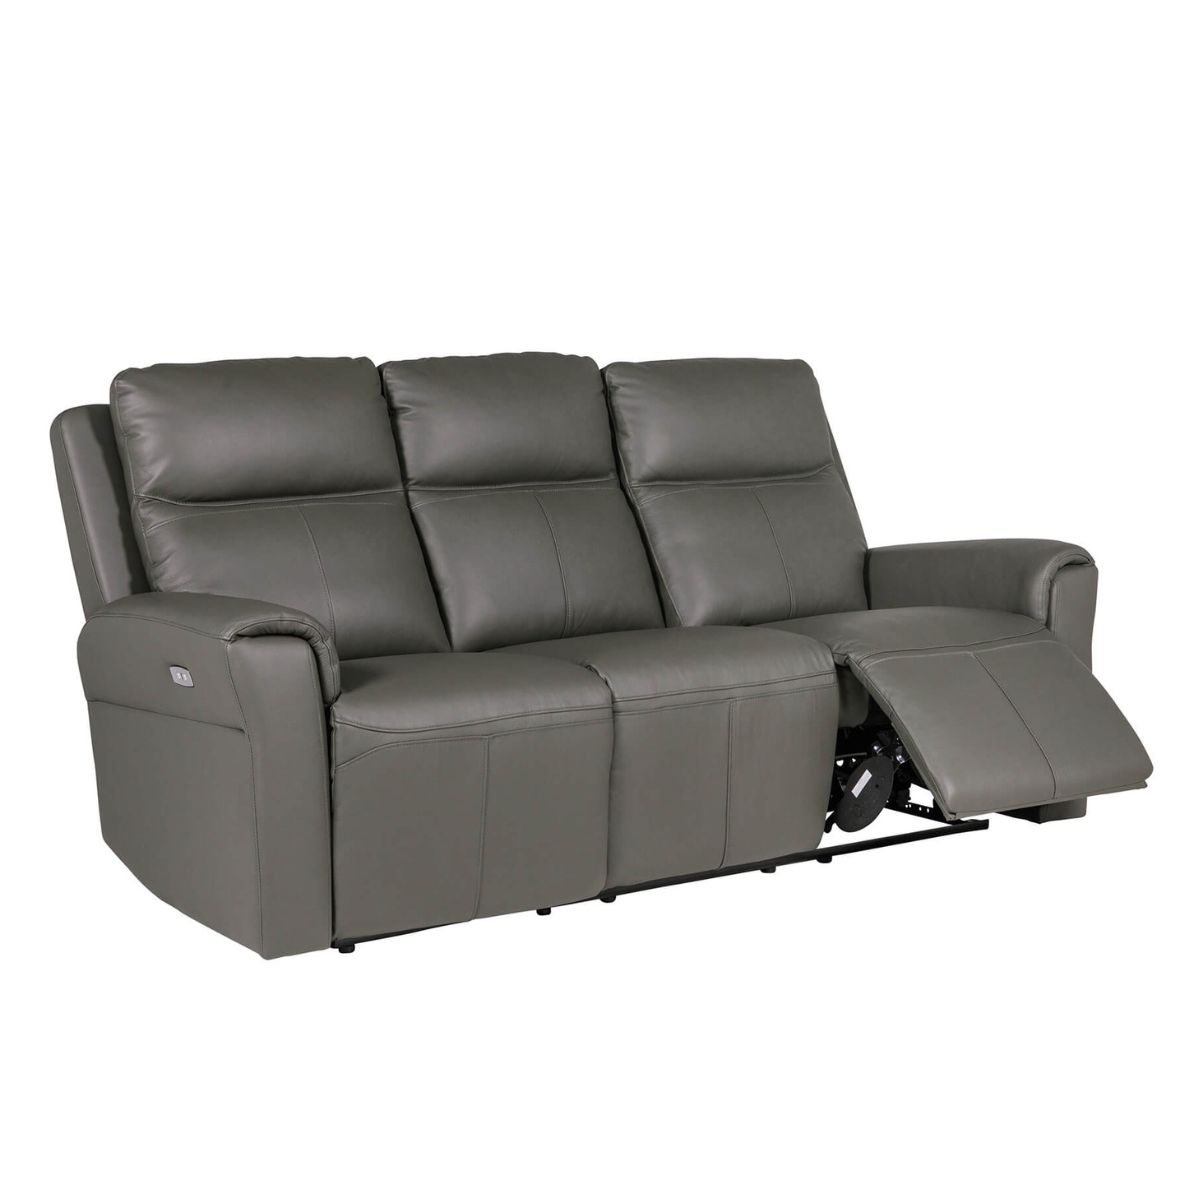 Rosslare Leather 3 Seater Electric Recliner Grey - 1